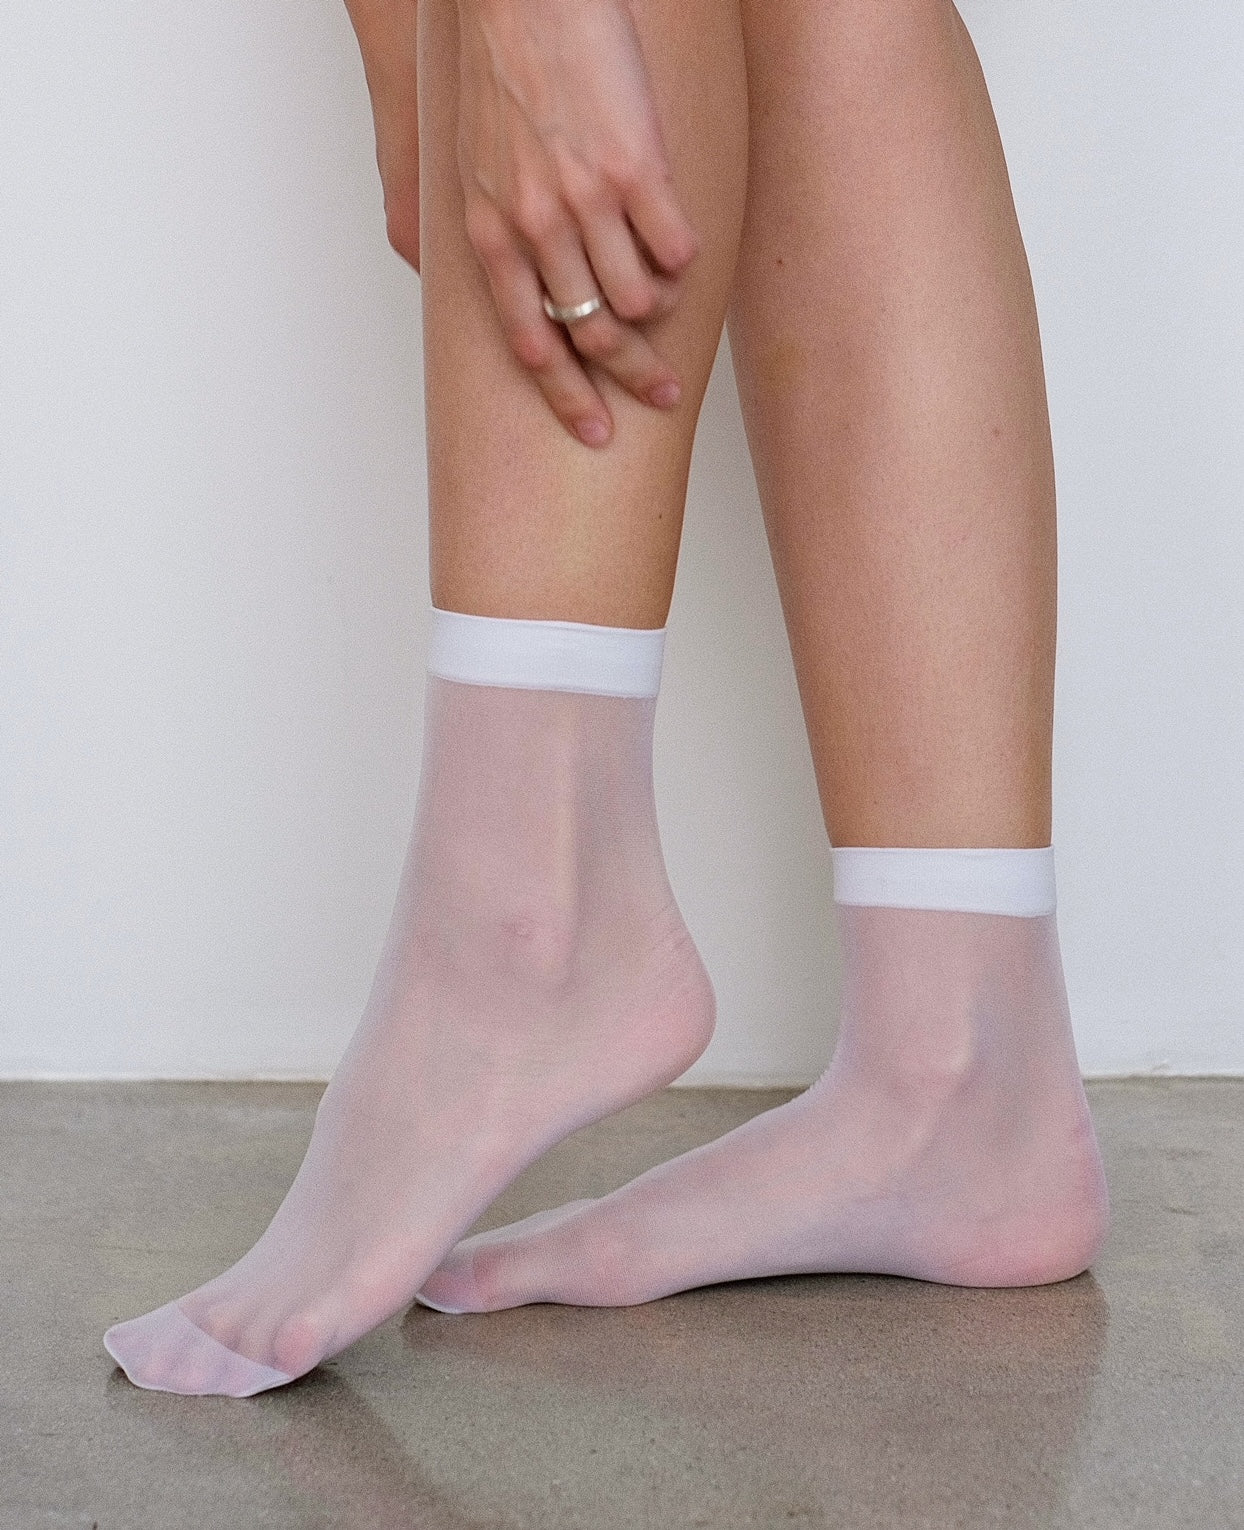 Sheerly Touch-Ya Sheer Ankle Sock in White